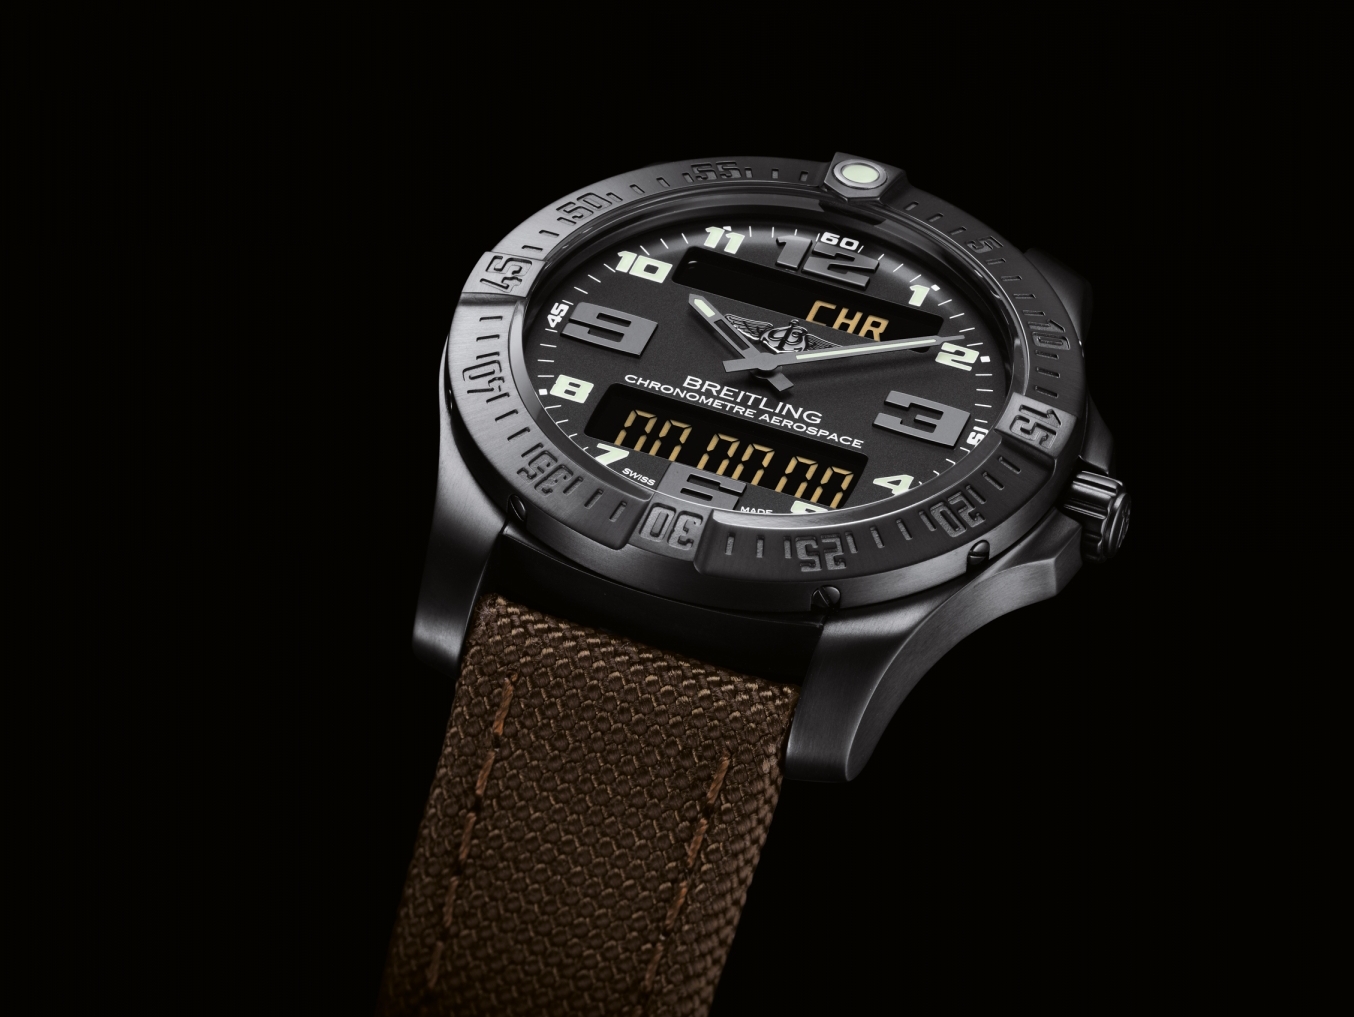 The Agent Watch Replica: Fully Functional Watch Which Glows Like The In-game Shd Watches